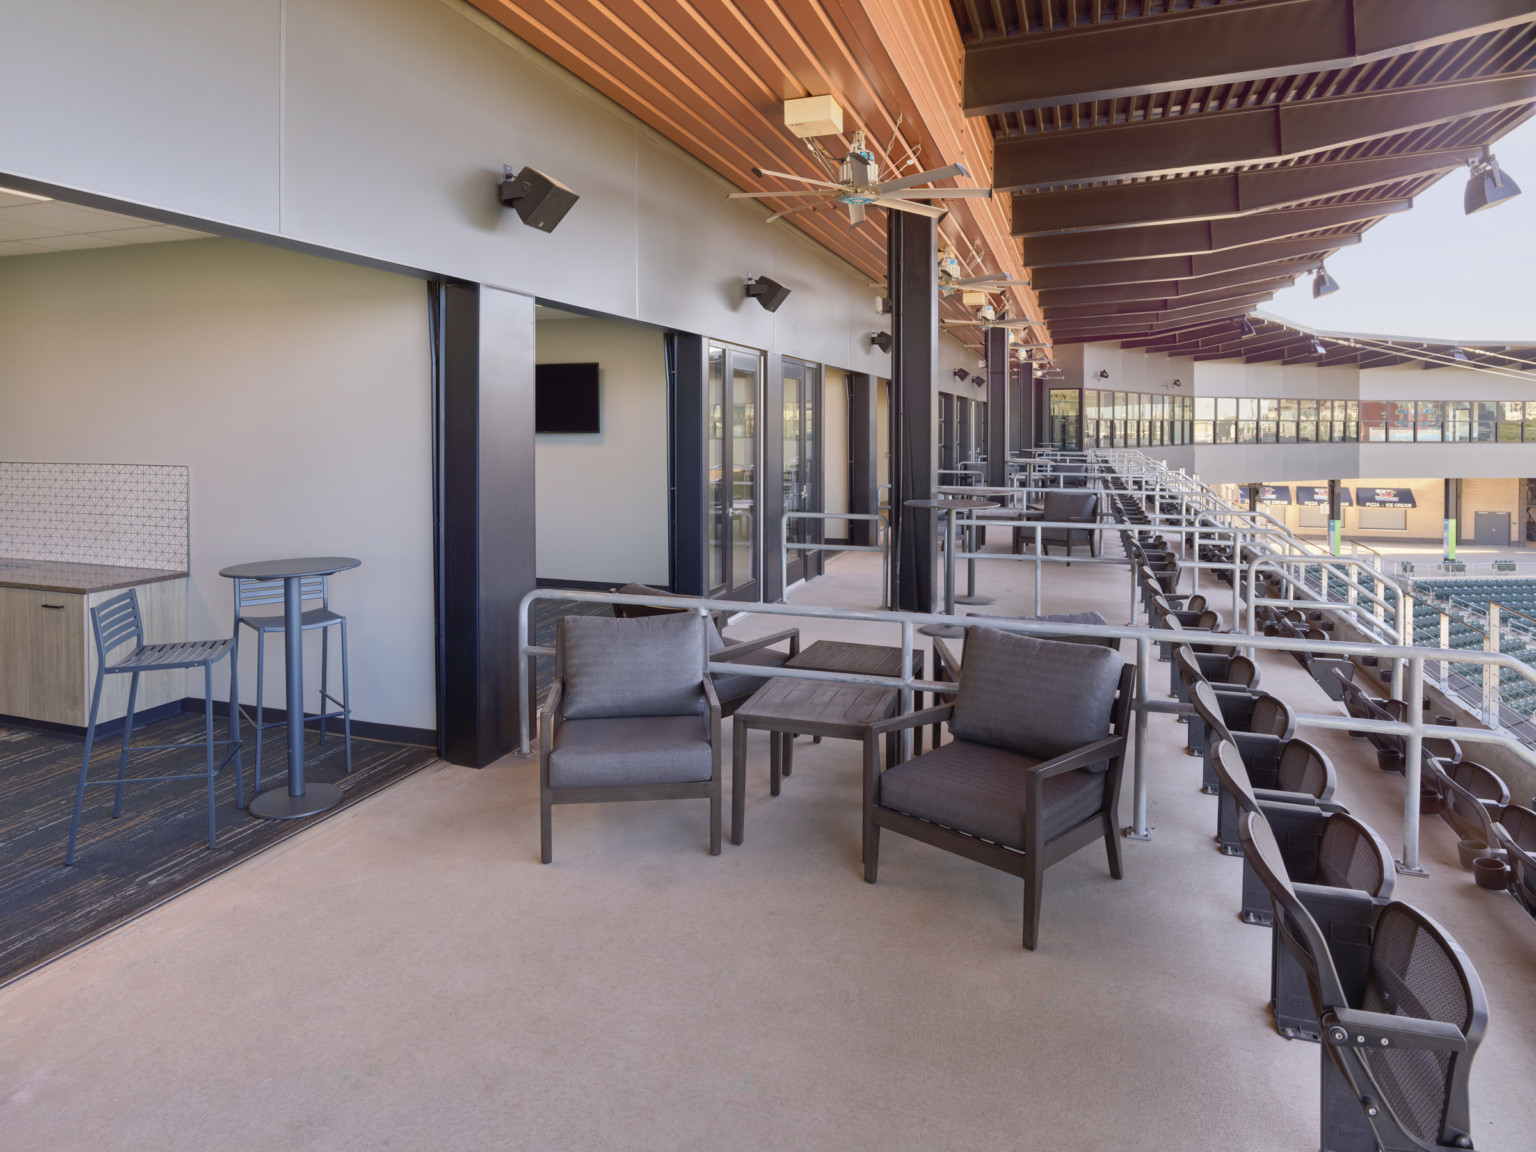 Suites on left with flexible wall opened out to patio with padded chairs and stadium seating. Grey railings between suites